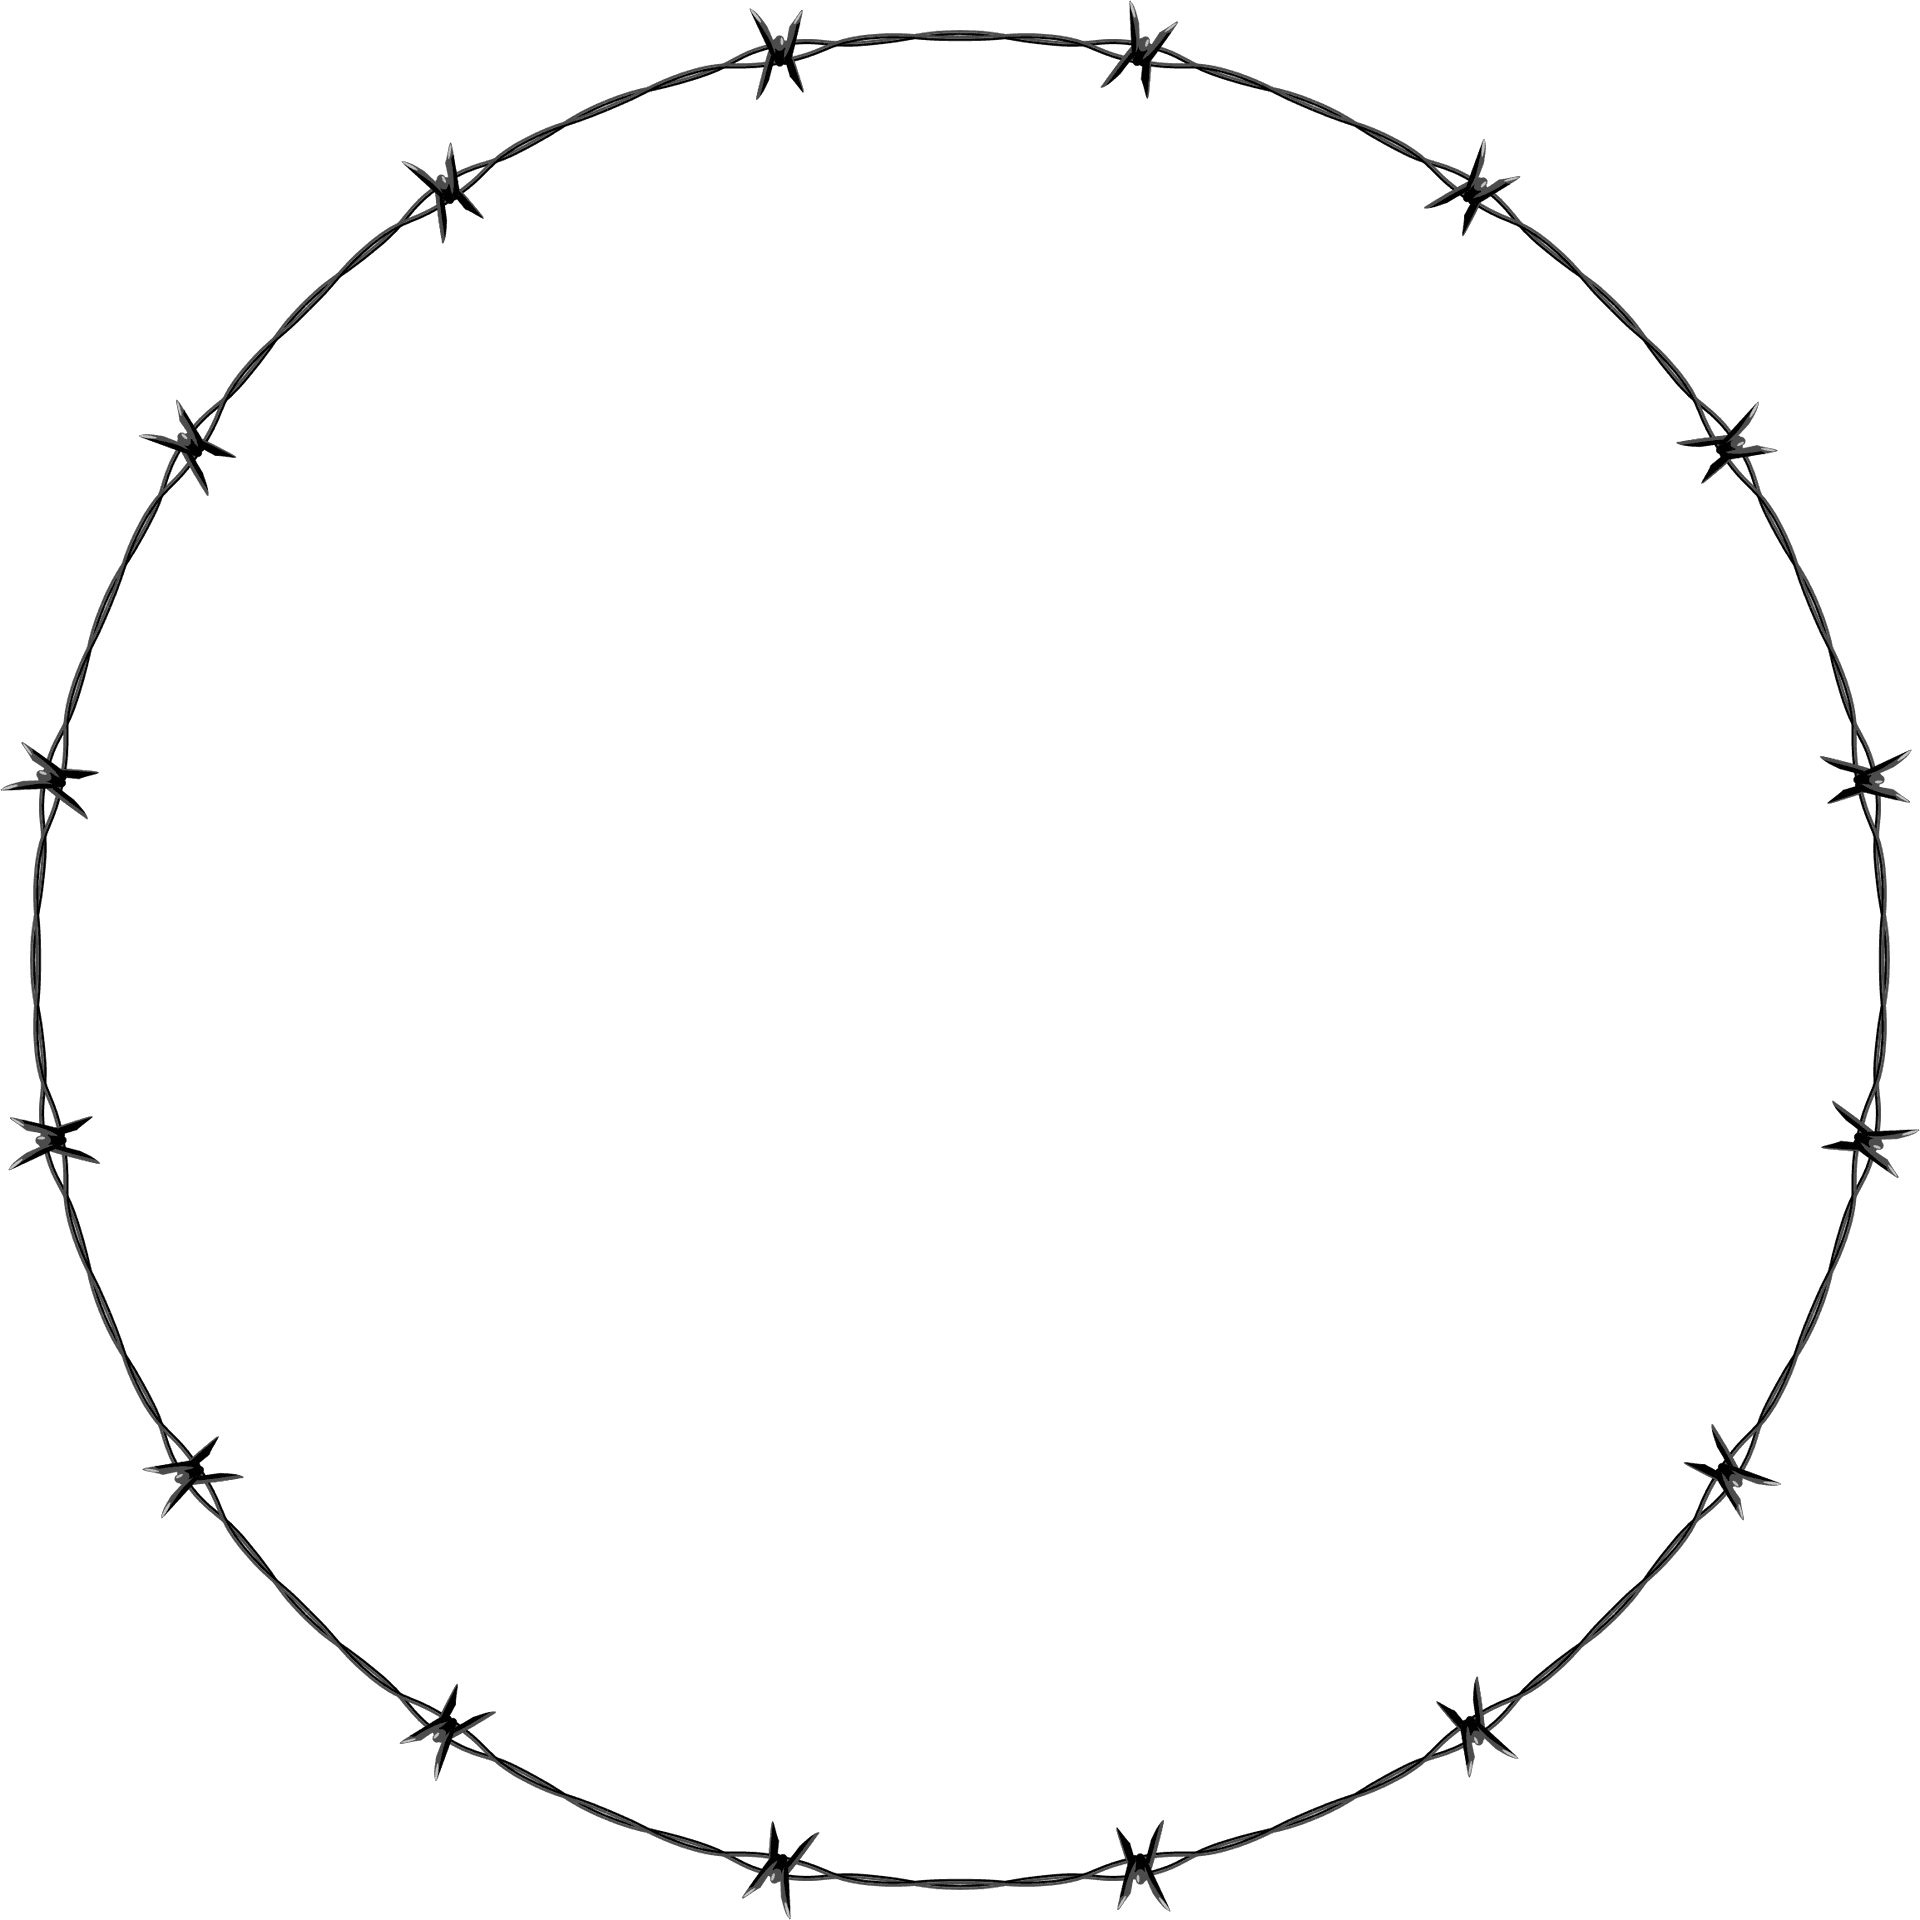 Star Studded Circle Border Graphic PNG